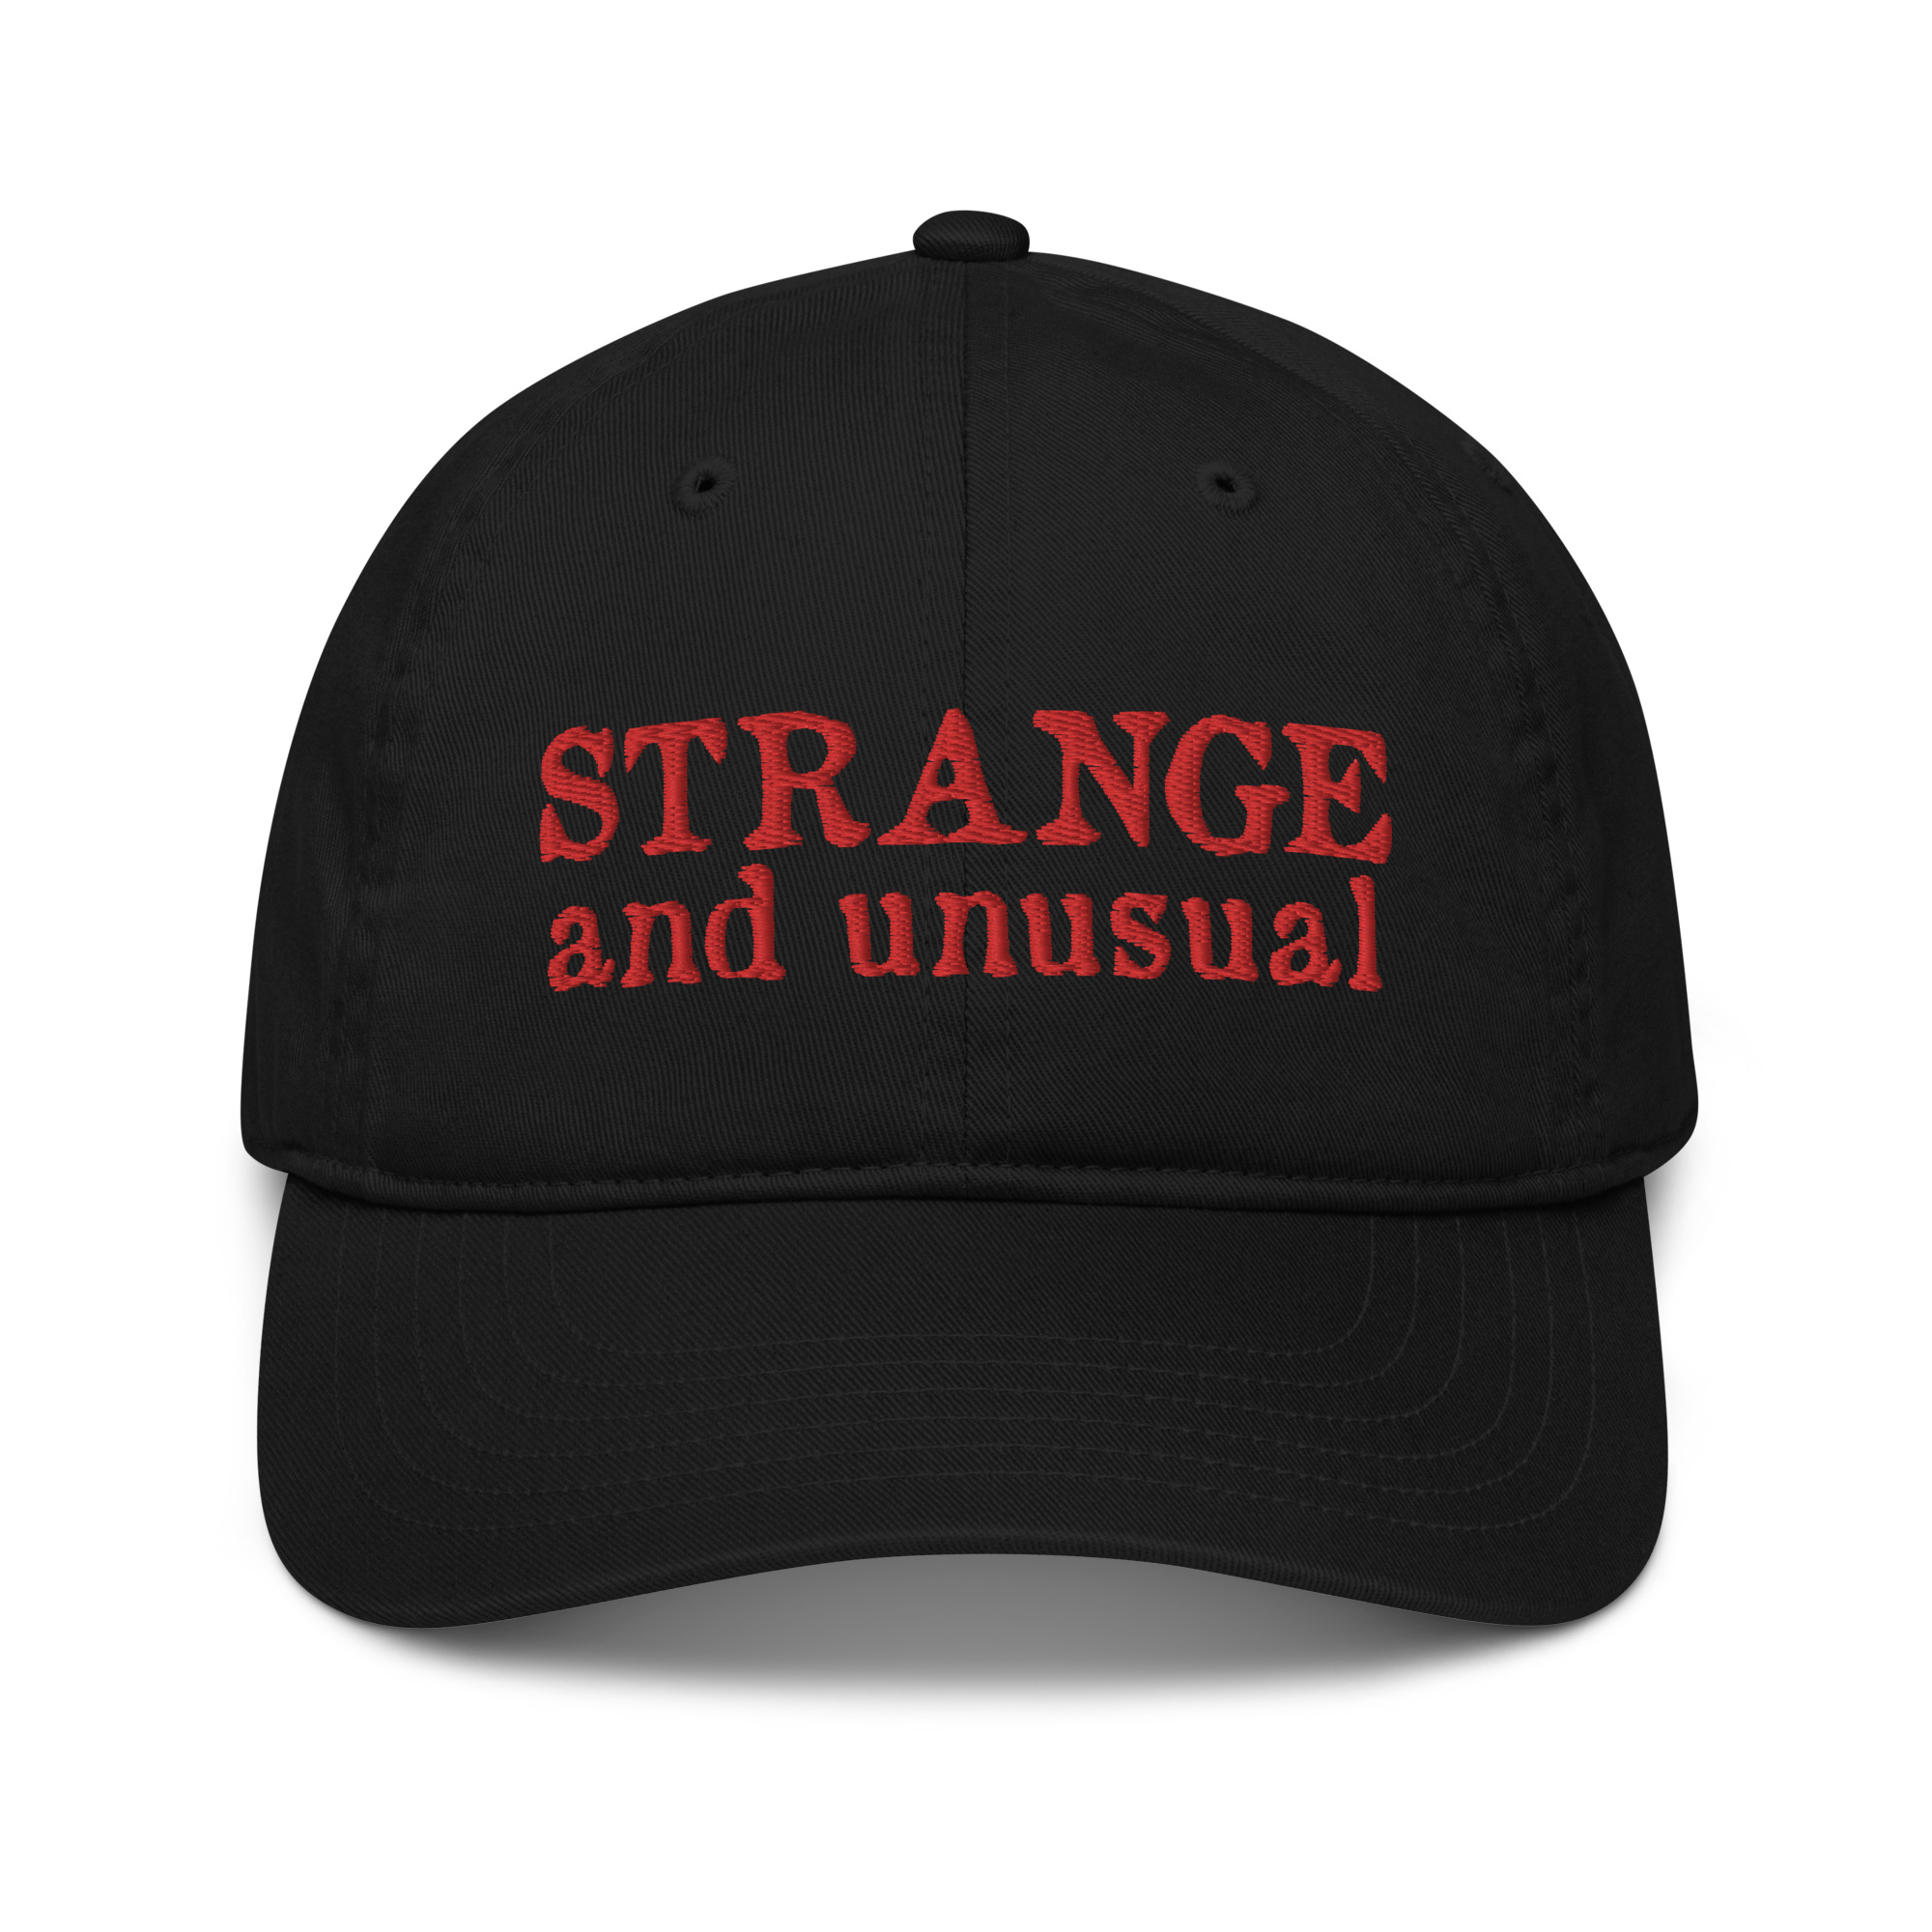 Featured image for “Strange and Unusual - Organic dad hat”